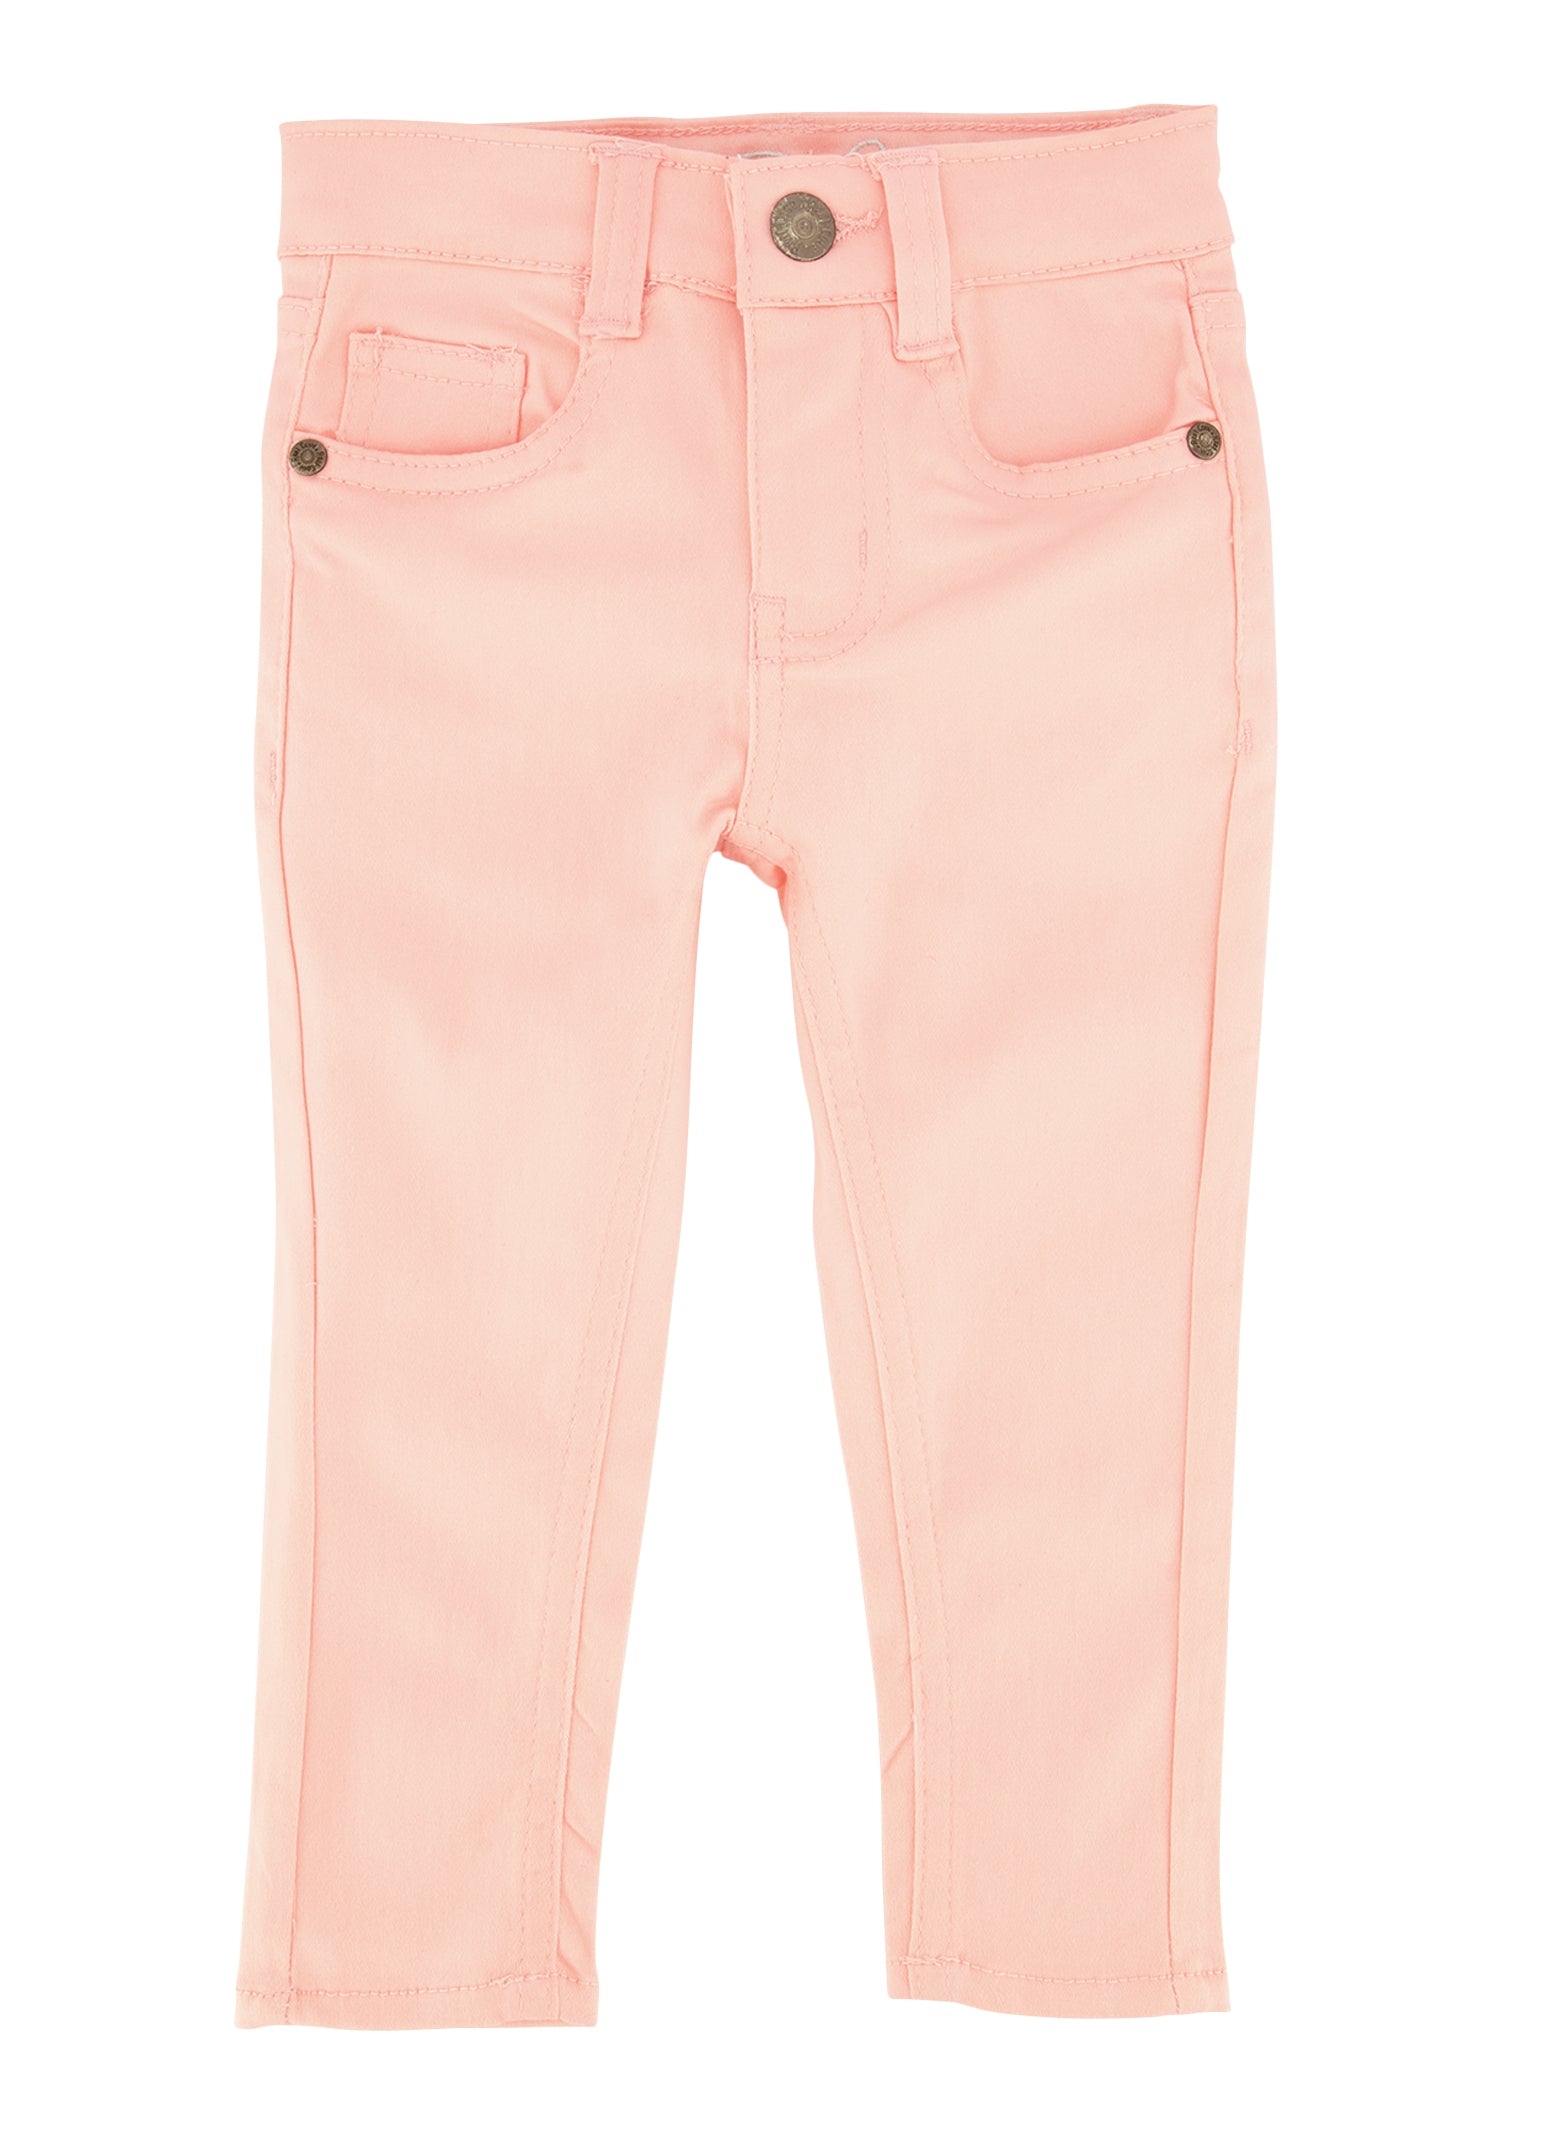 Toddler Girls Solid Twill Pants